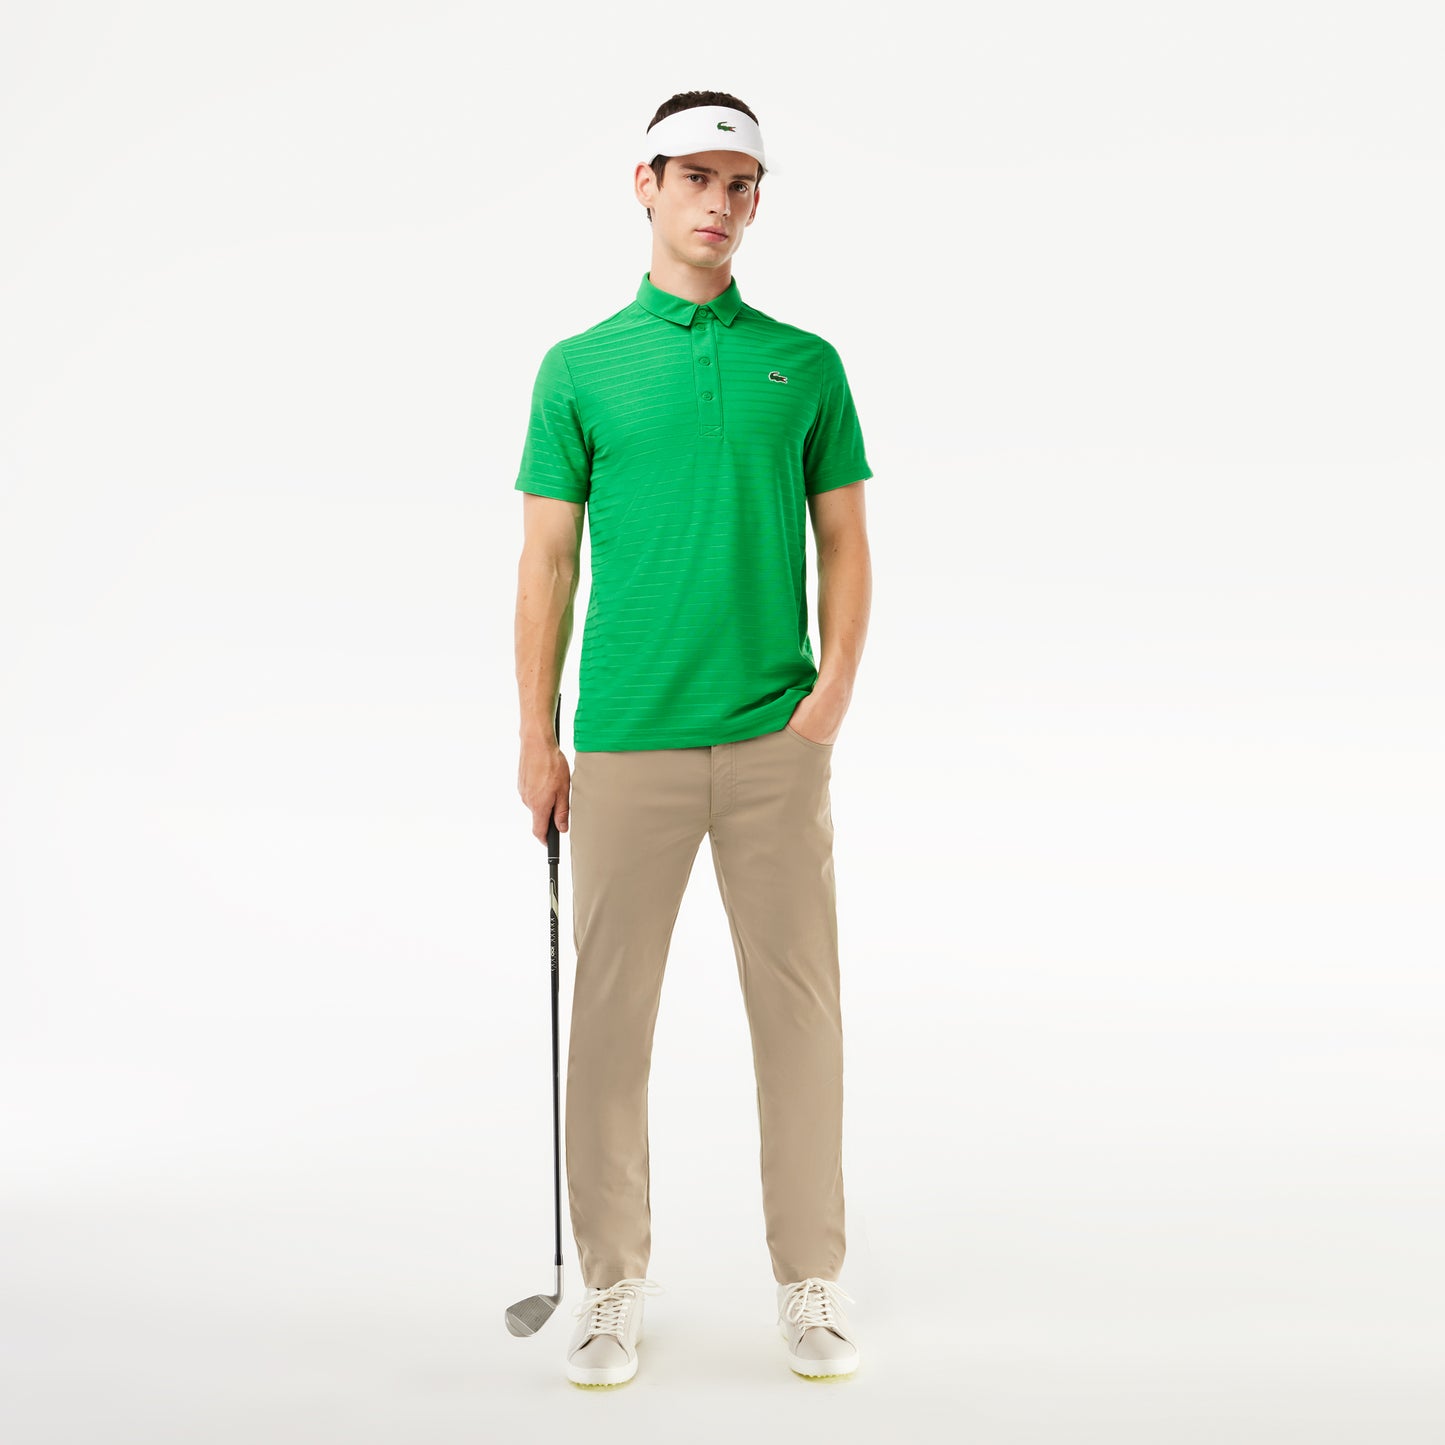 Golf trousers with grip band